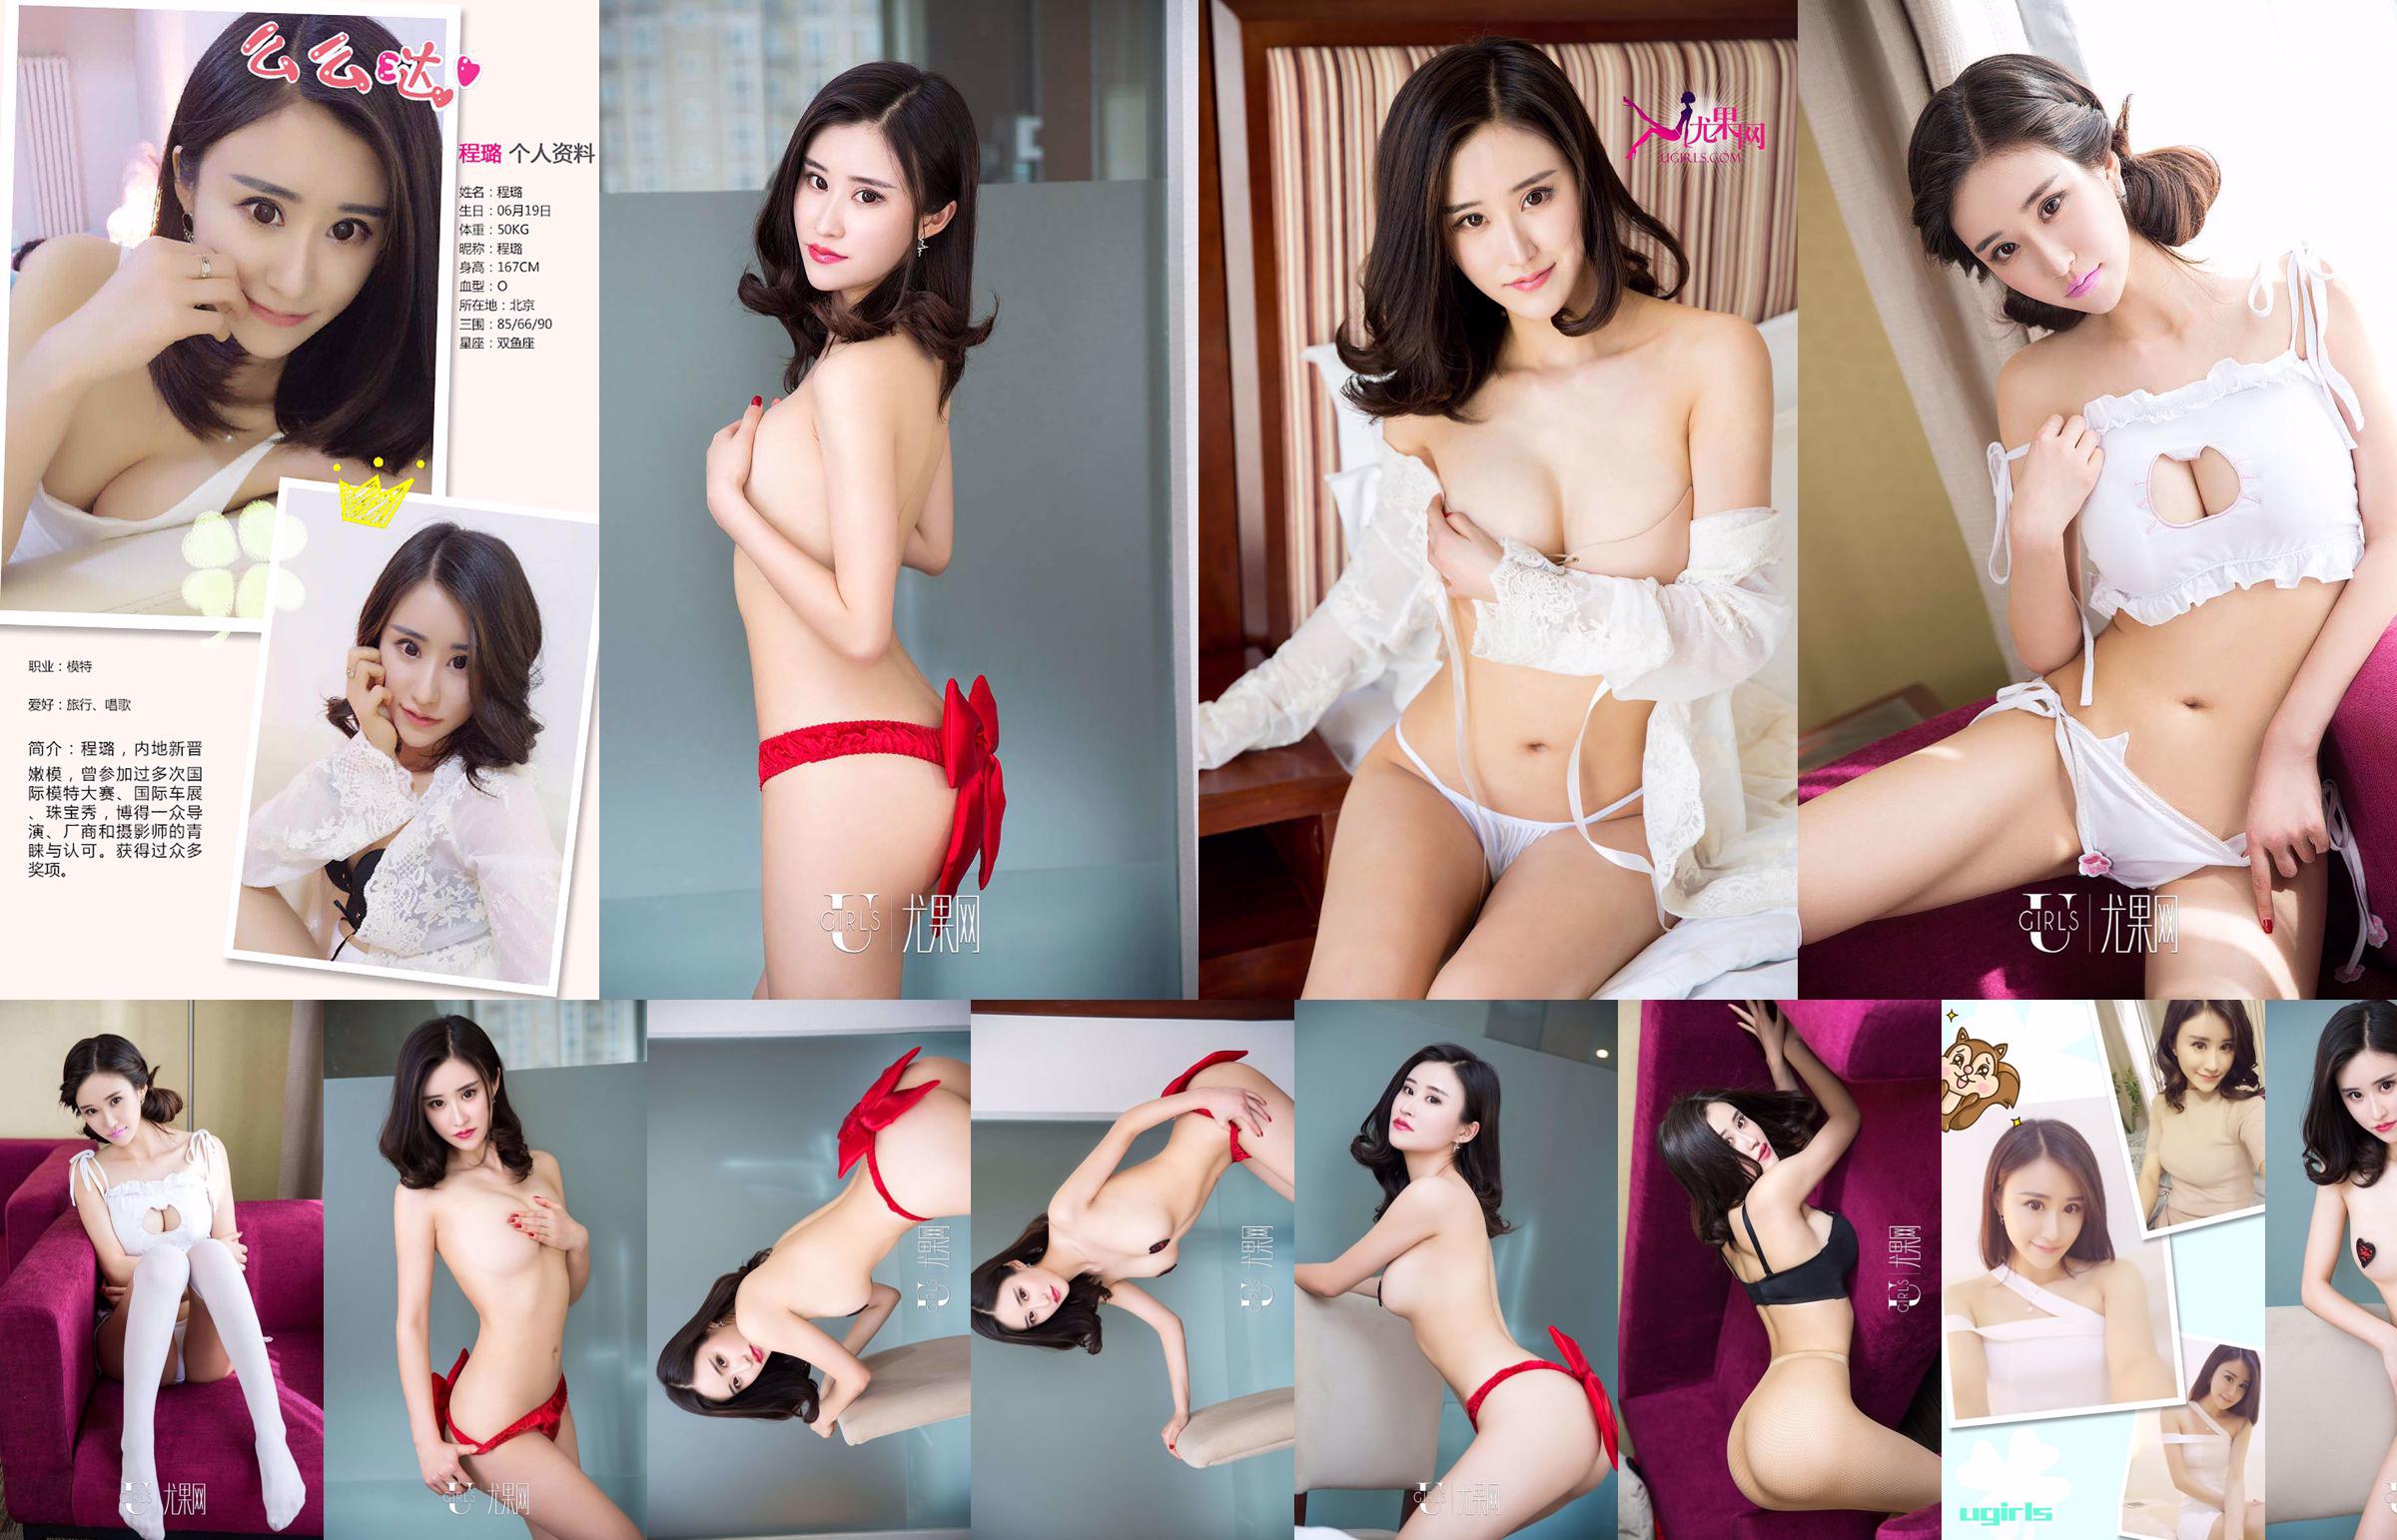 Cheng Lu "Butterfly Temptation" [爱优物Ugirls] No.361 No.7a95ca Page 1